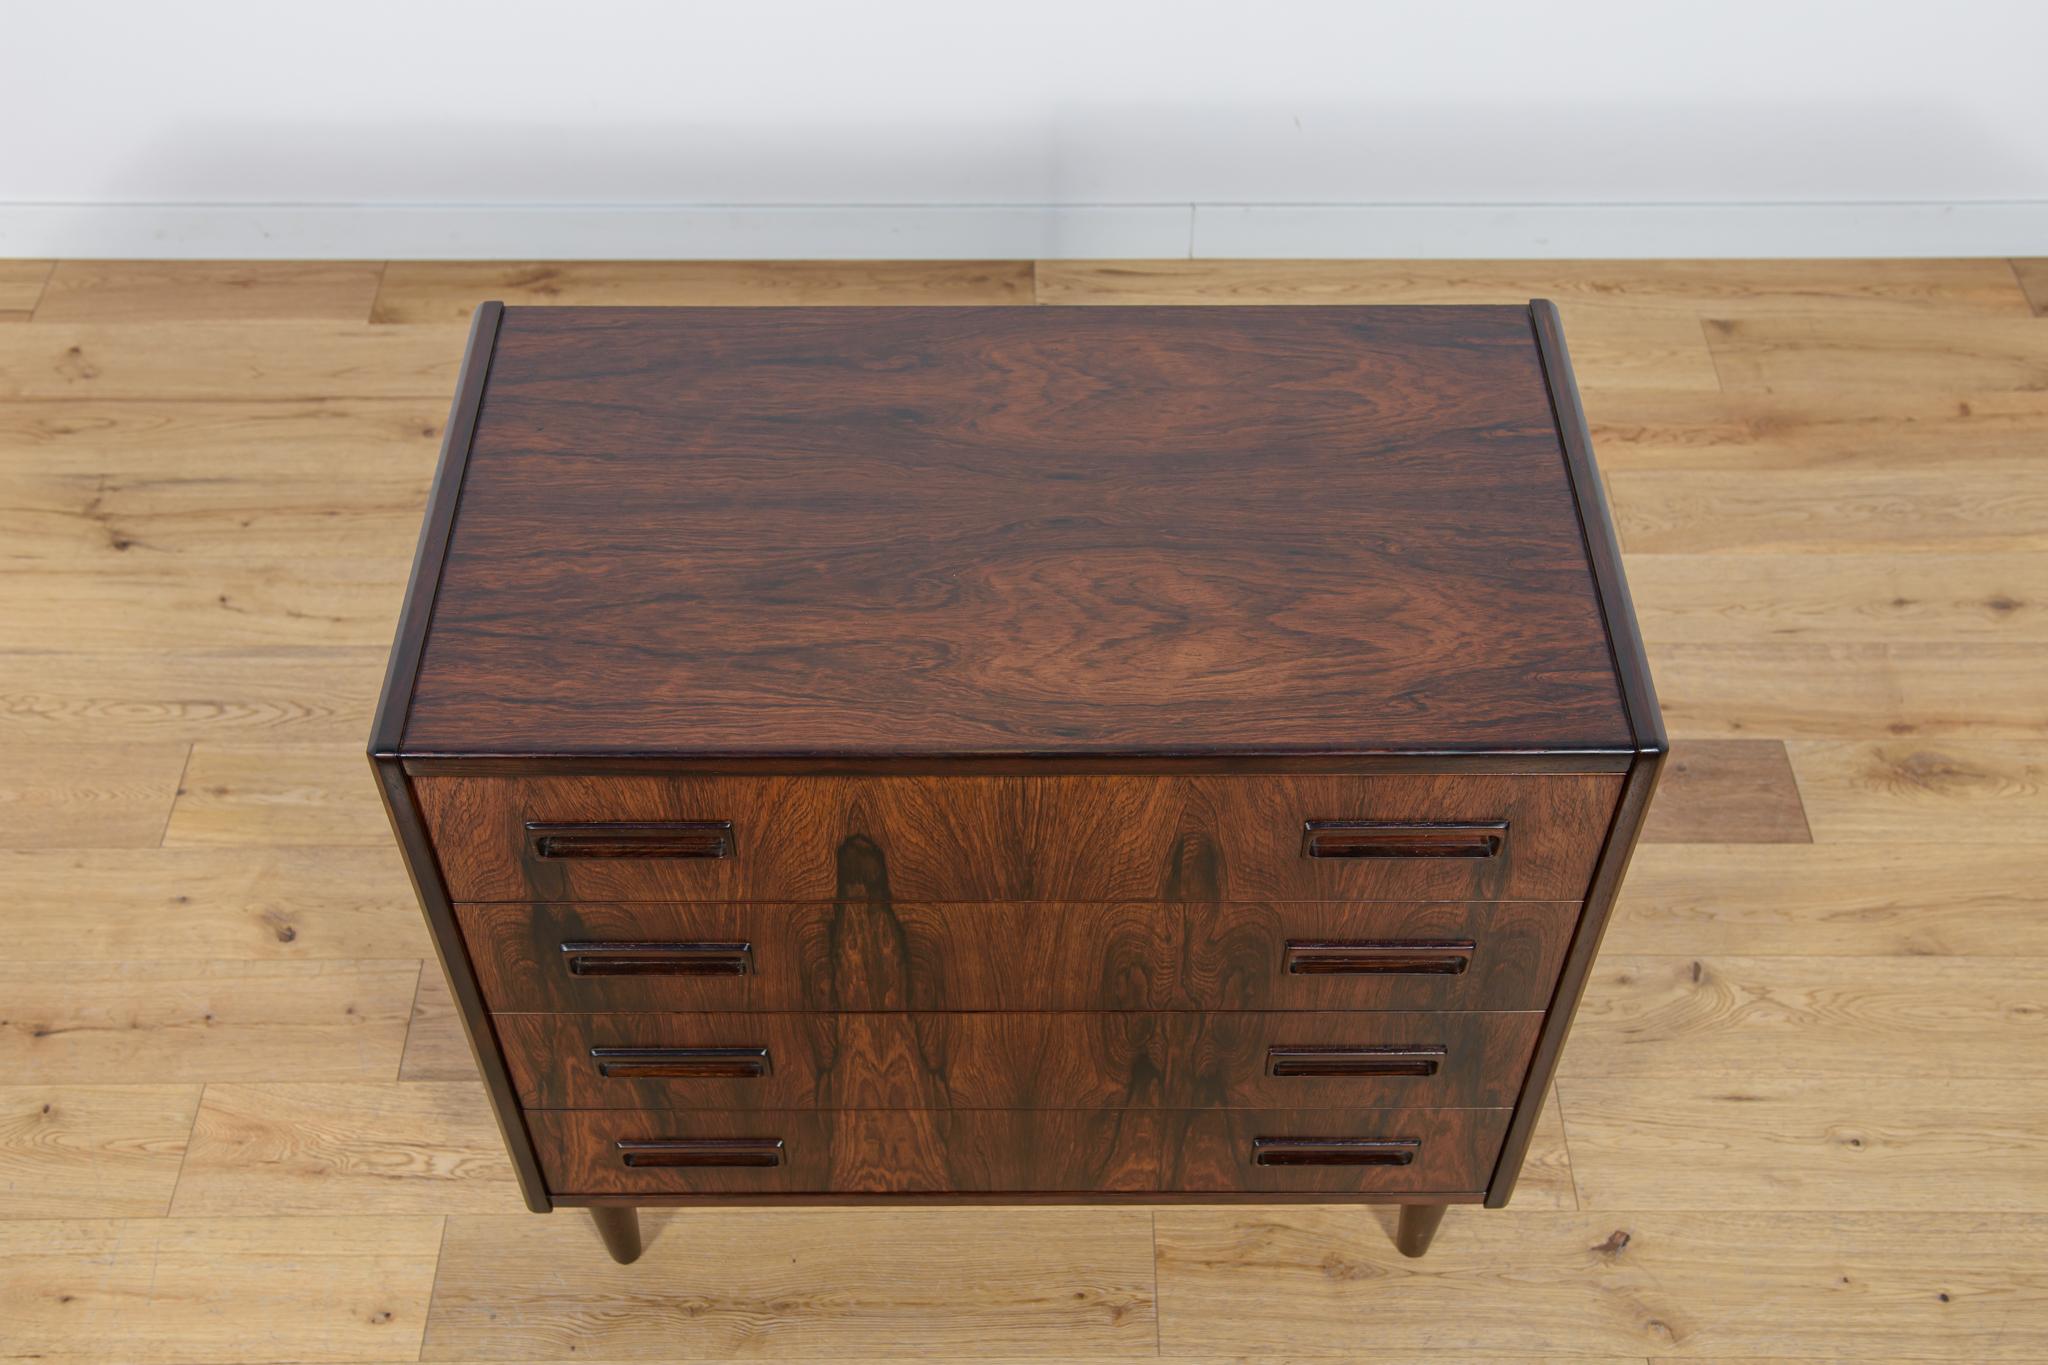 
Dresser designed by Eric Jensen and Juul Andersen for Westergaard Mobelfabrik in the 1960s in Denmark. The dresser consists of four drawers and has contoured handles. A piece of furniture made of rosewood with interesting graining. The furniture